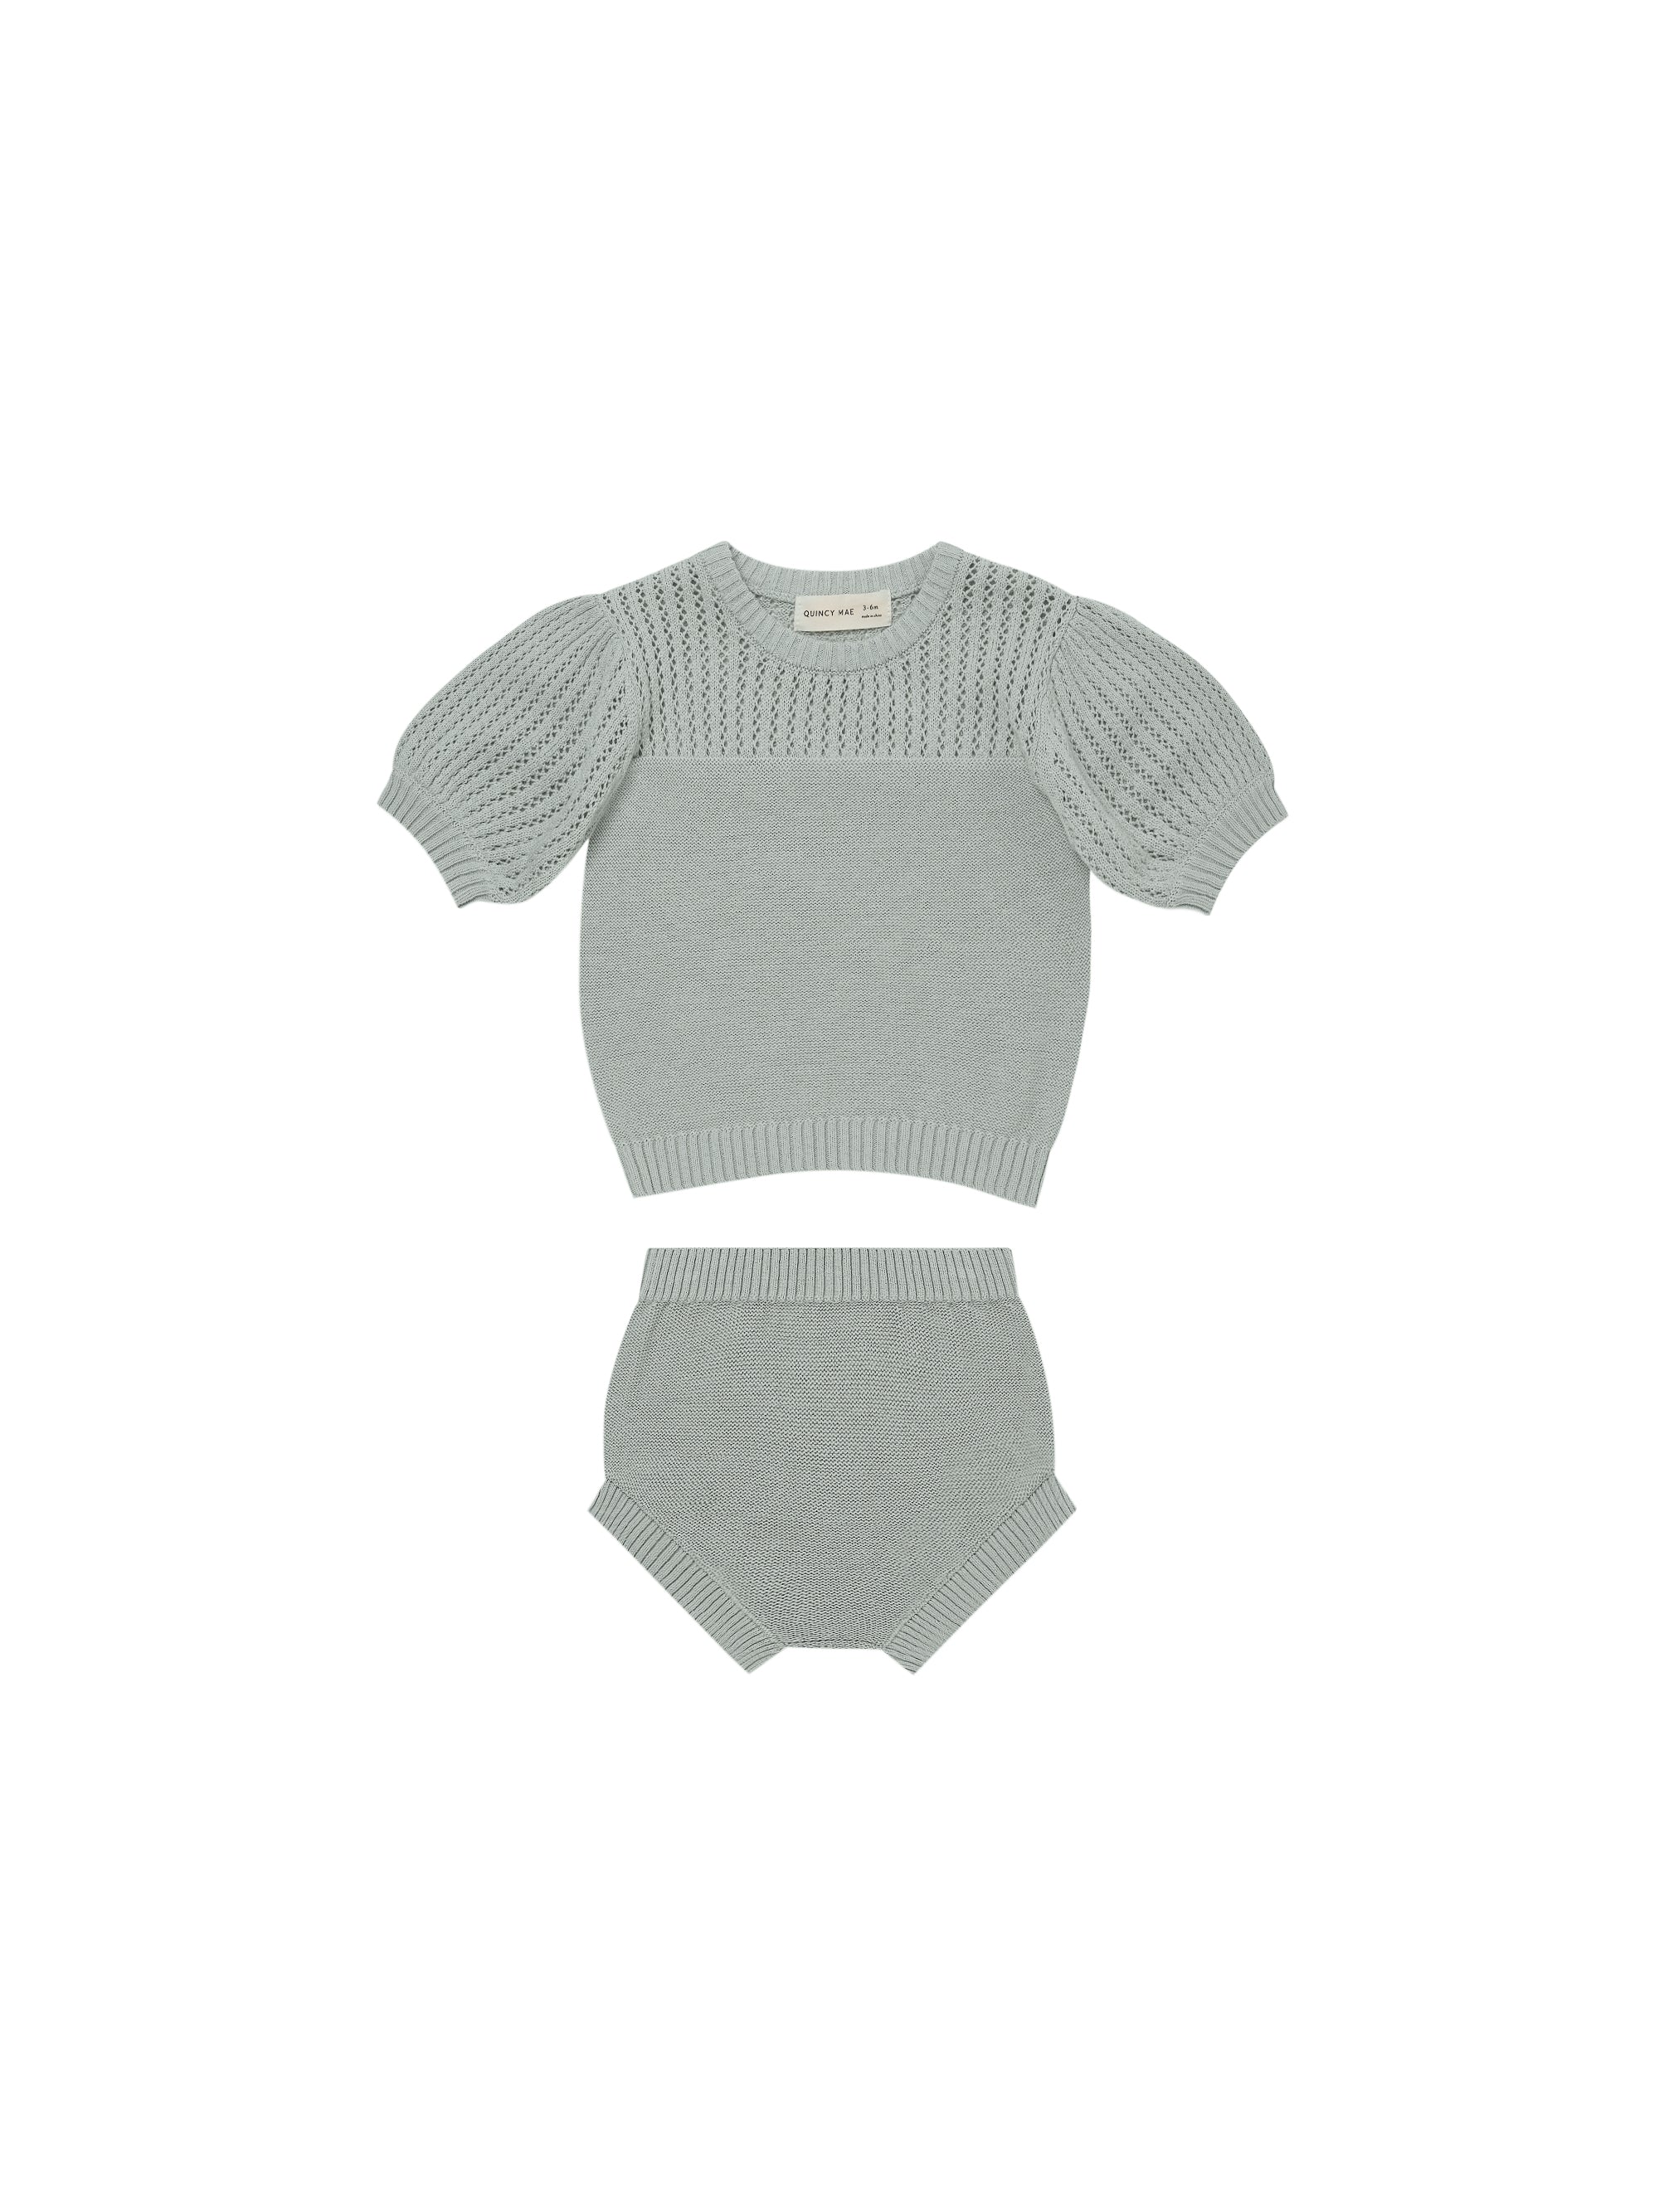 Quincy Mae Pointelle Knit Set - Sky